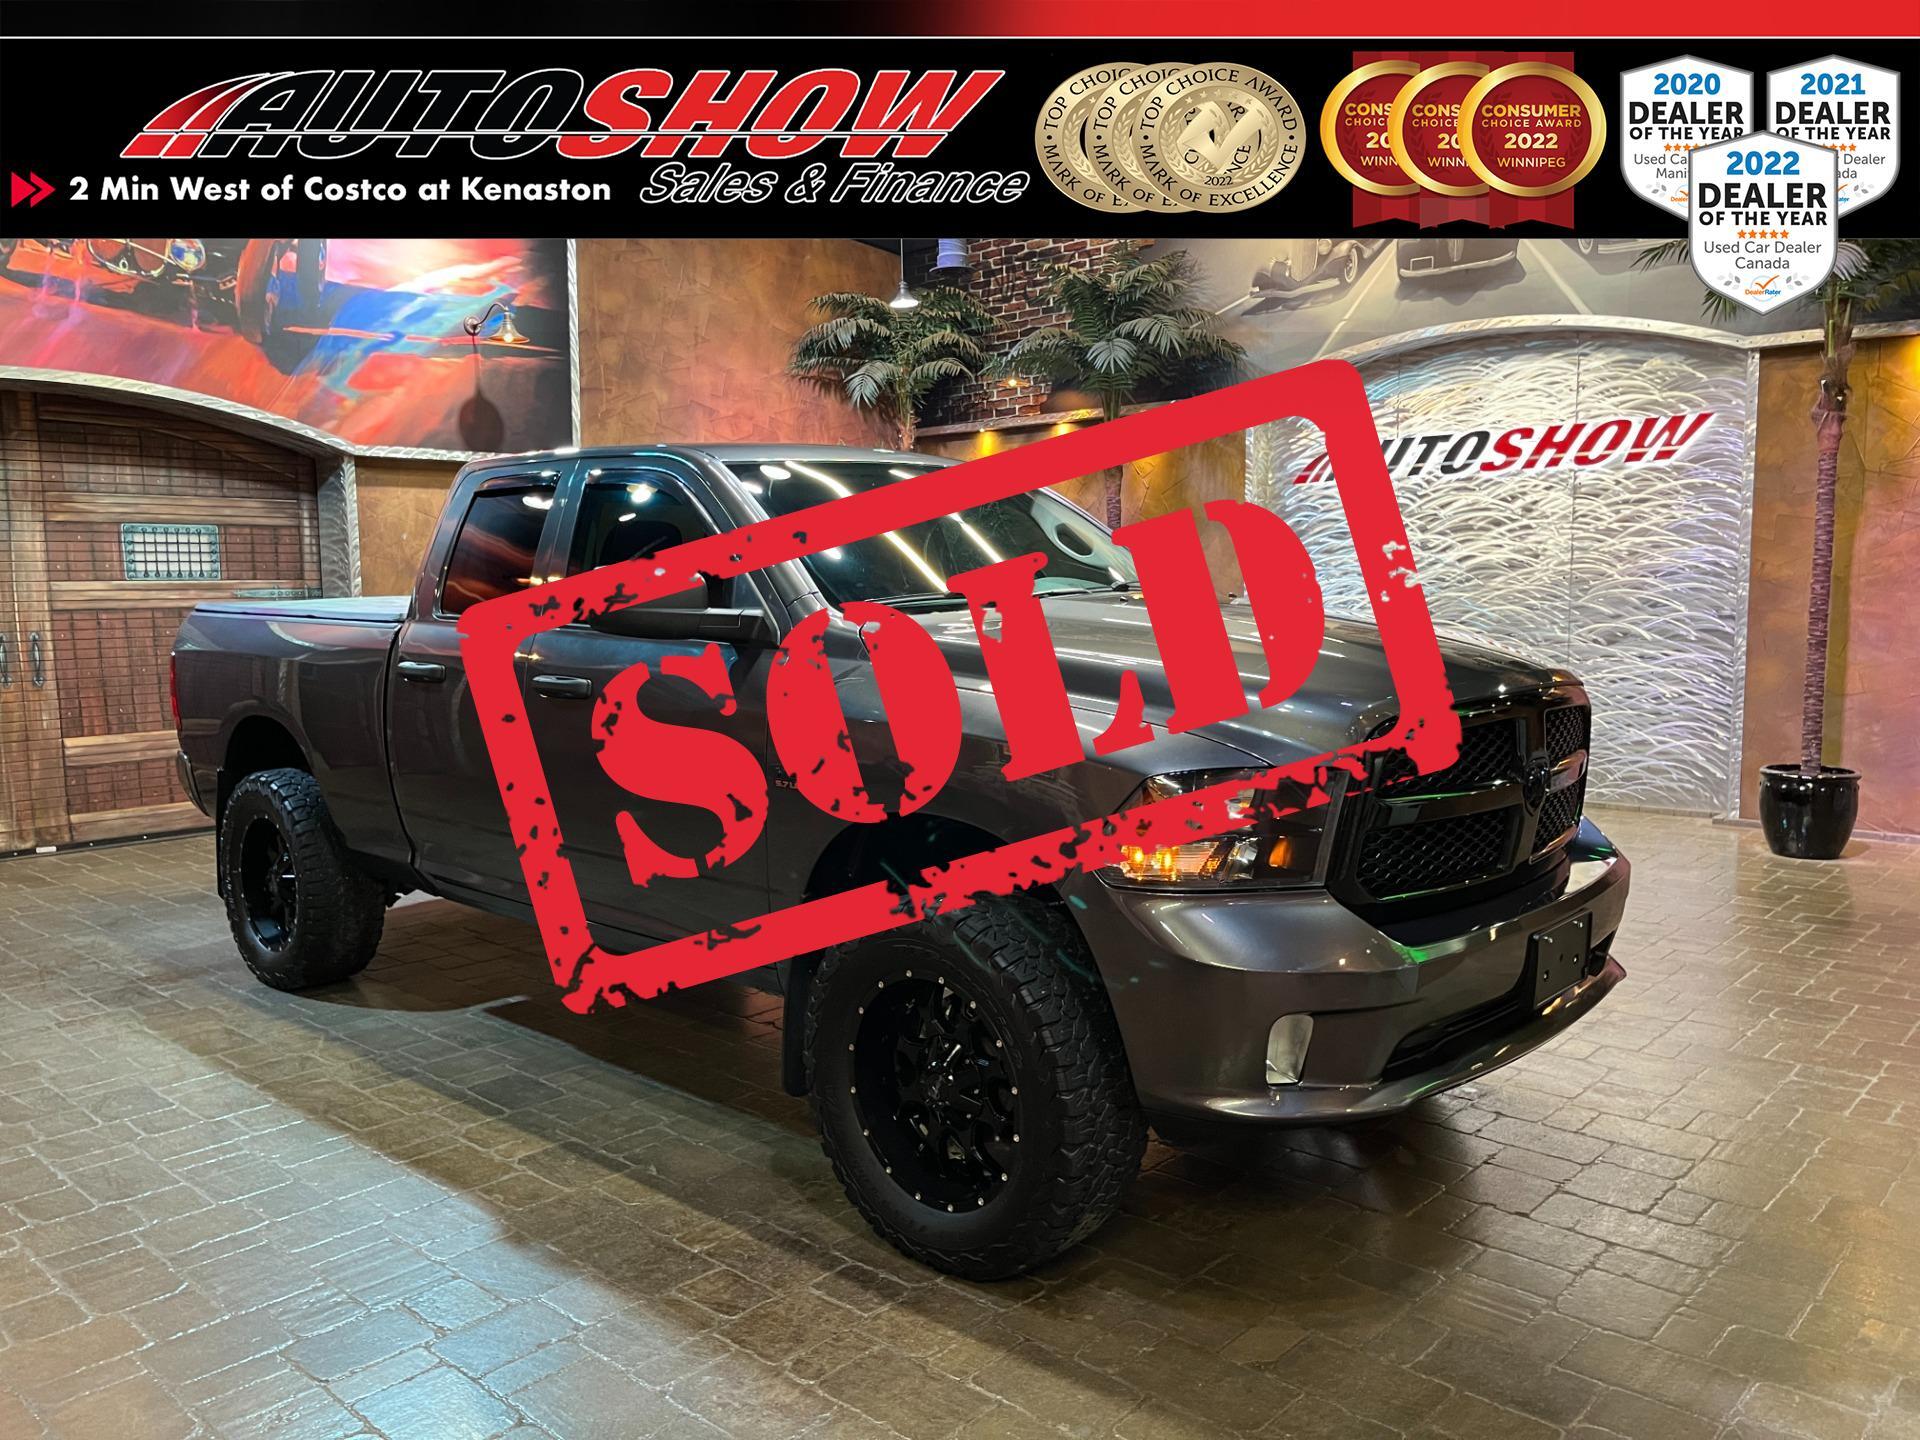 2021 Dodge Ram 1500 Lifted Night Edition - 35in KO2s, Htd Seats & Whee